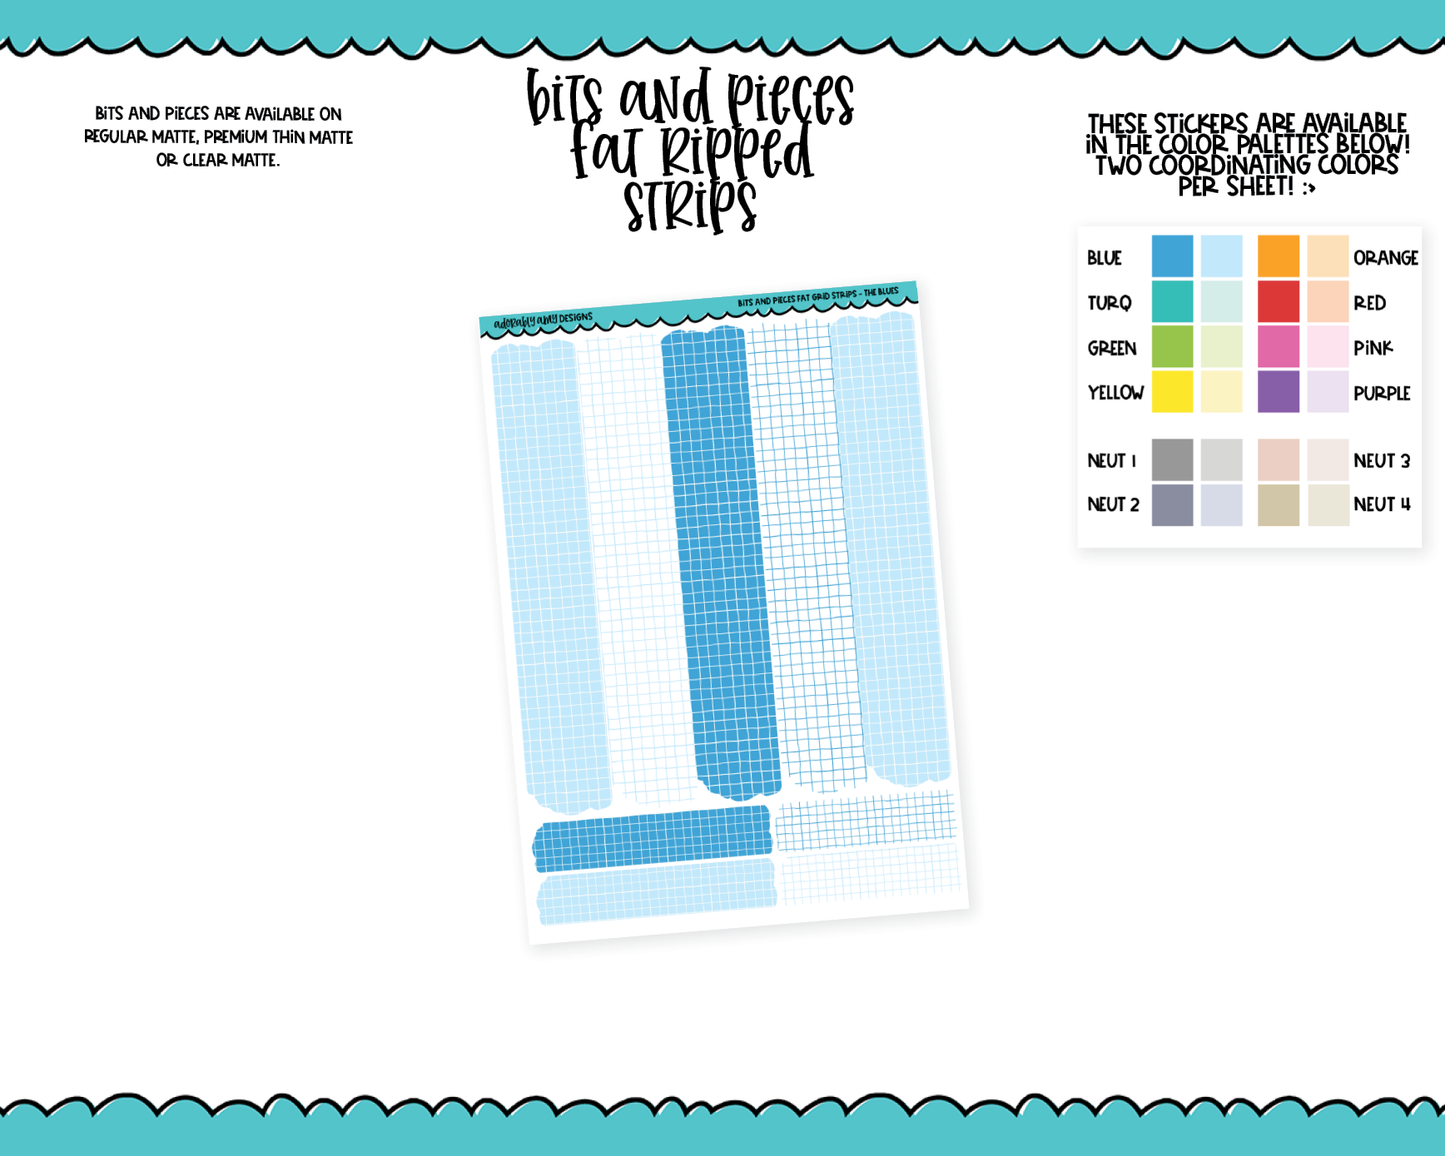 Bits & Pieces Fat Strips Pieces Kit Addons for Any Planner in 13 different Color Schemes